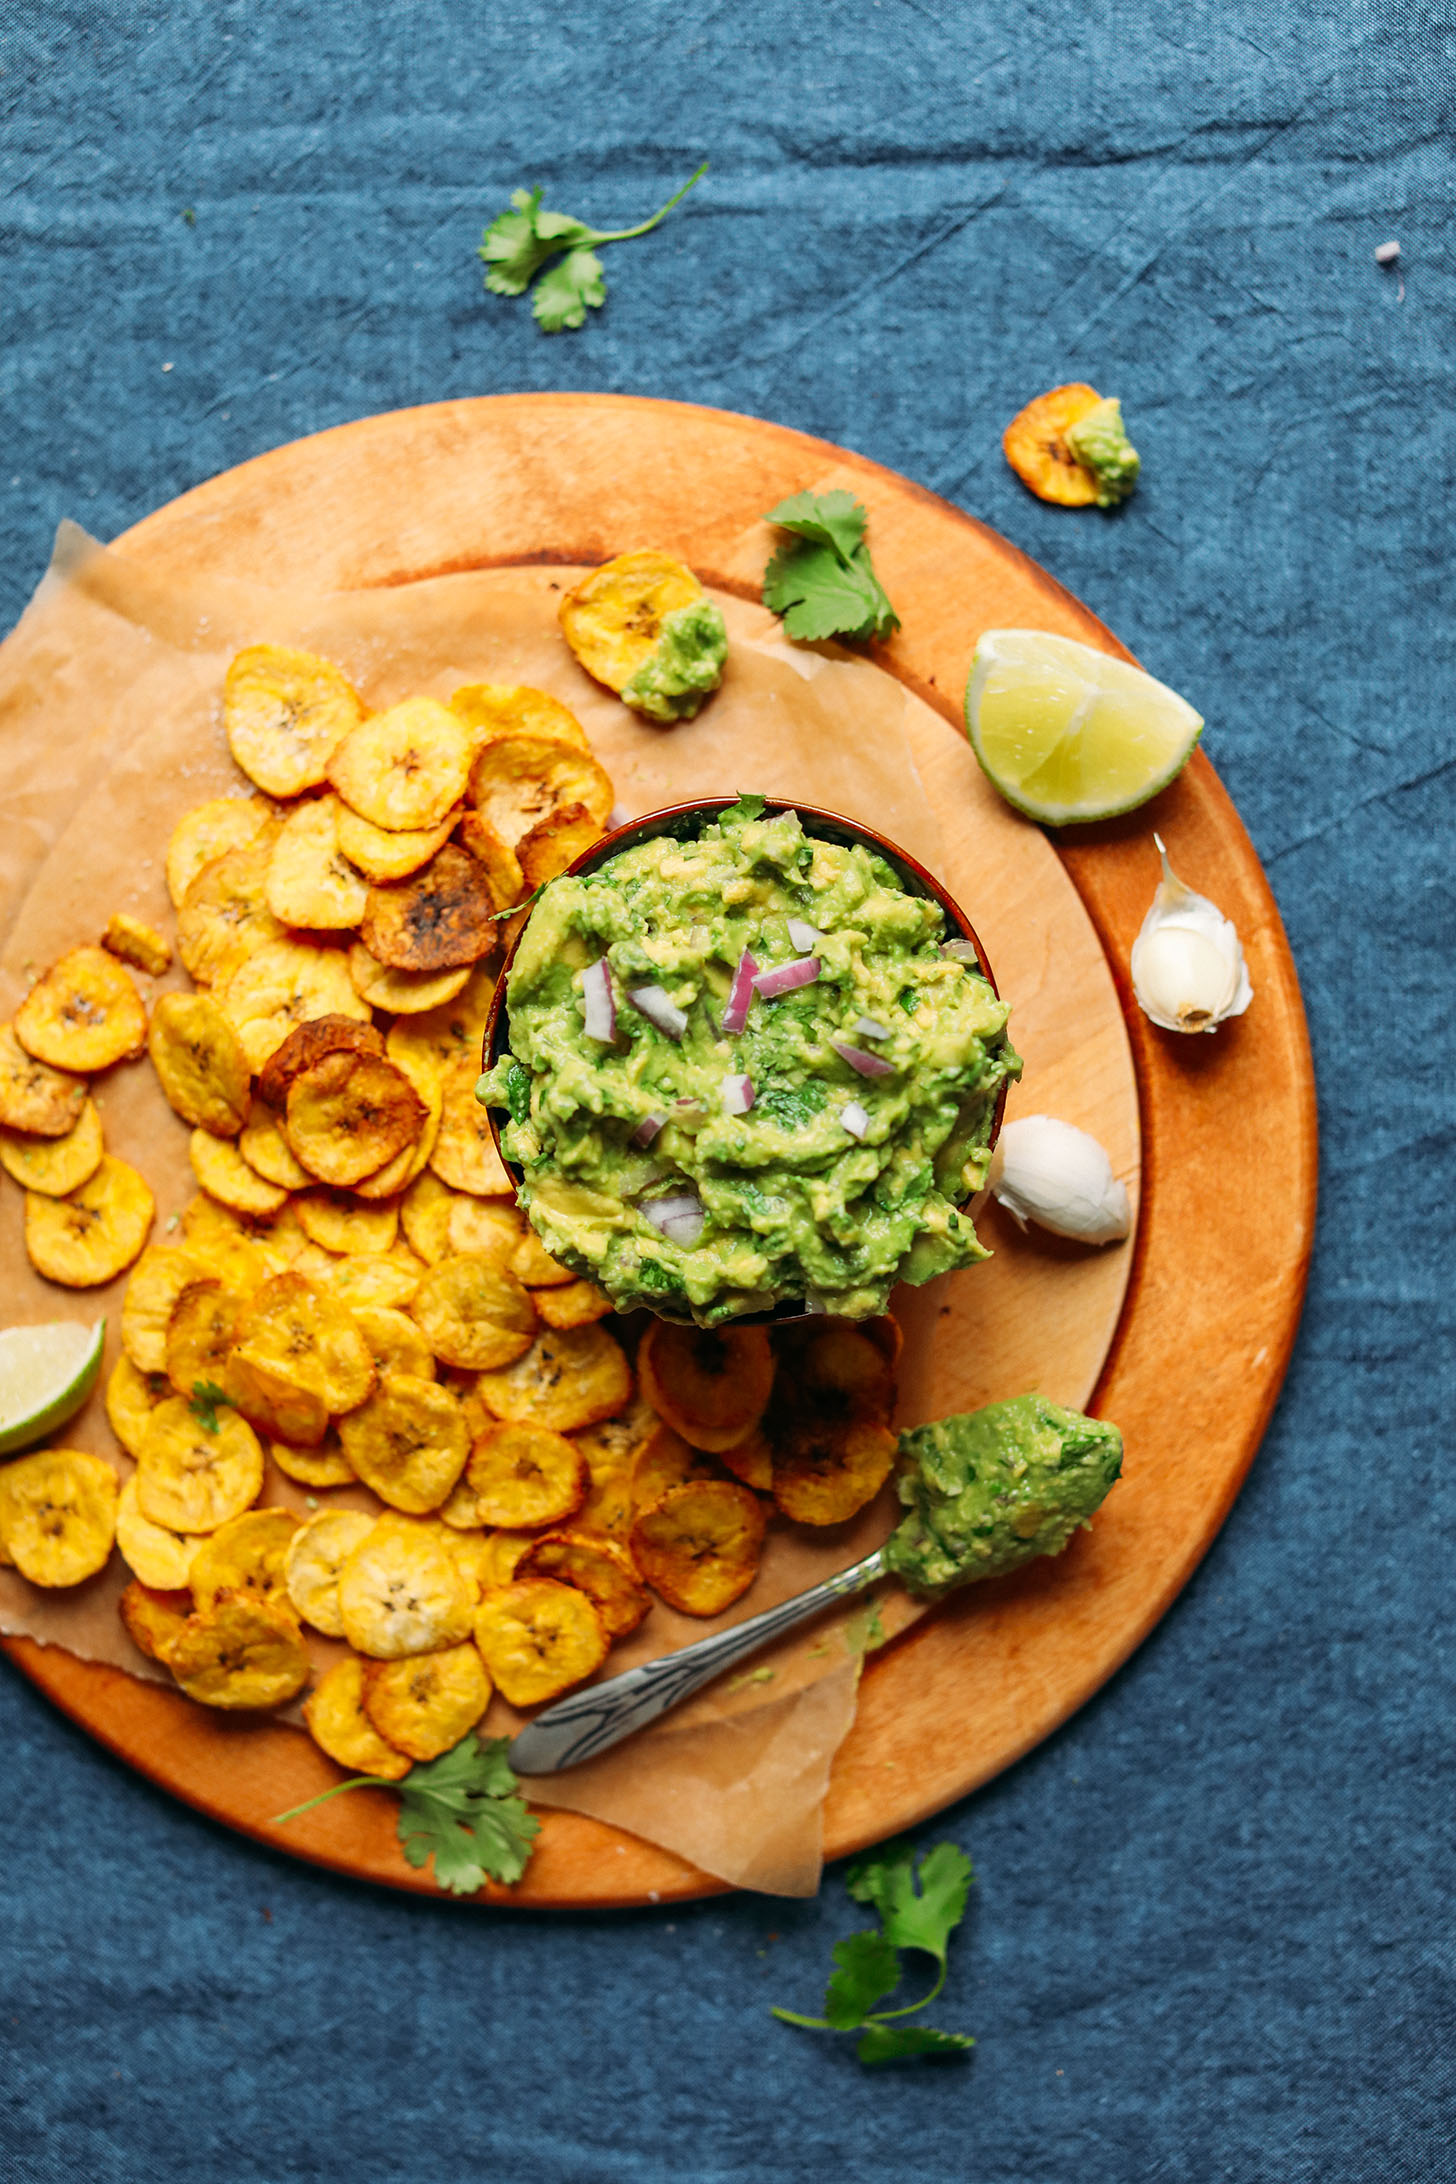 Crispy BAKED Plantain Chips and Garlicky Guac! 7 ingredients, 30 minutes, SUPER healthy! #vegan #glutenfree #plantain #guacamole #recipe #minimalistbaker